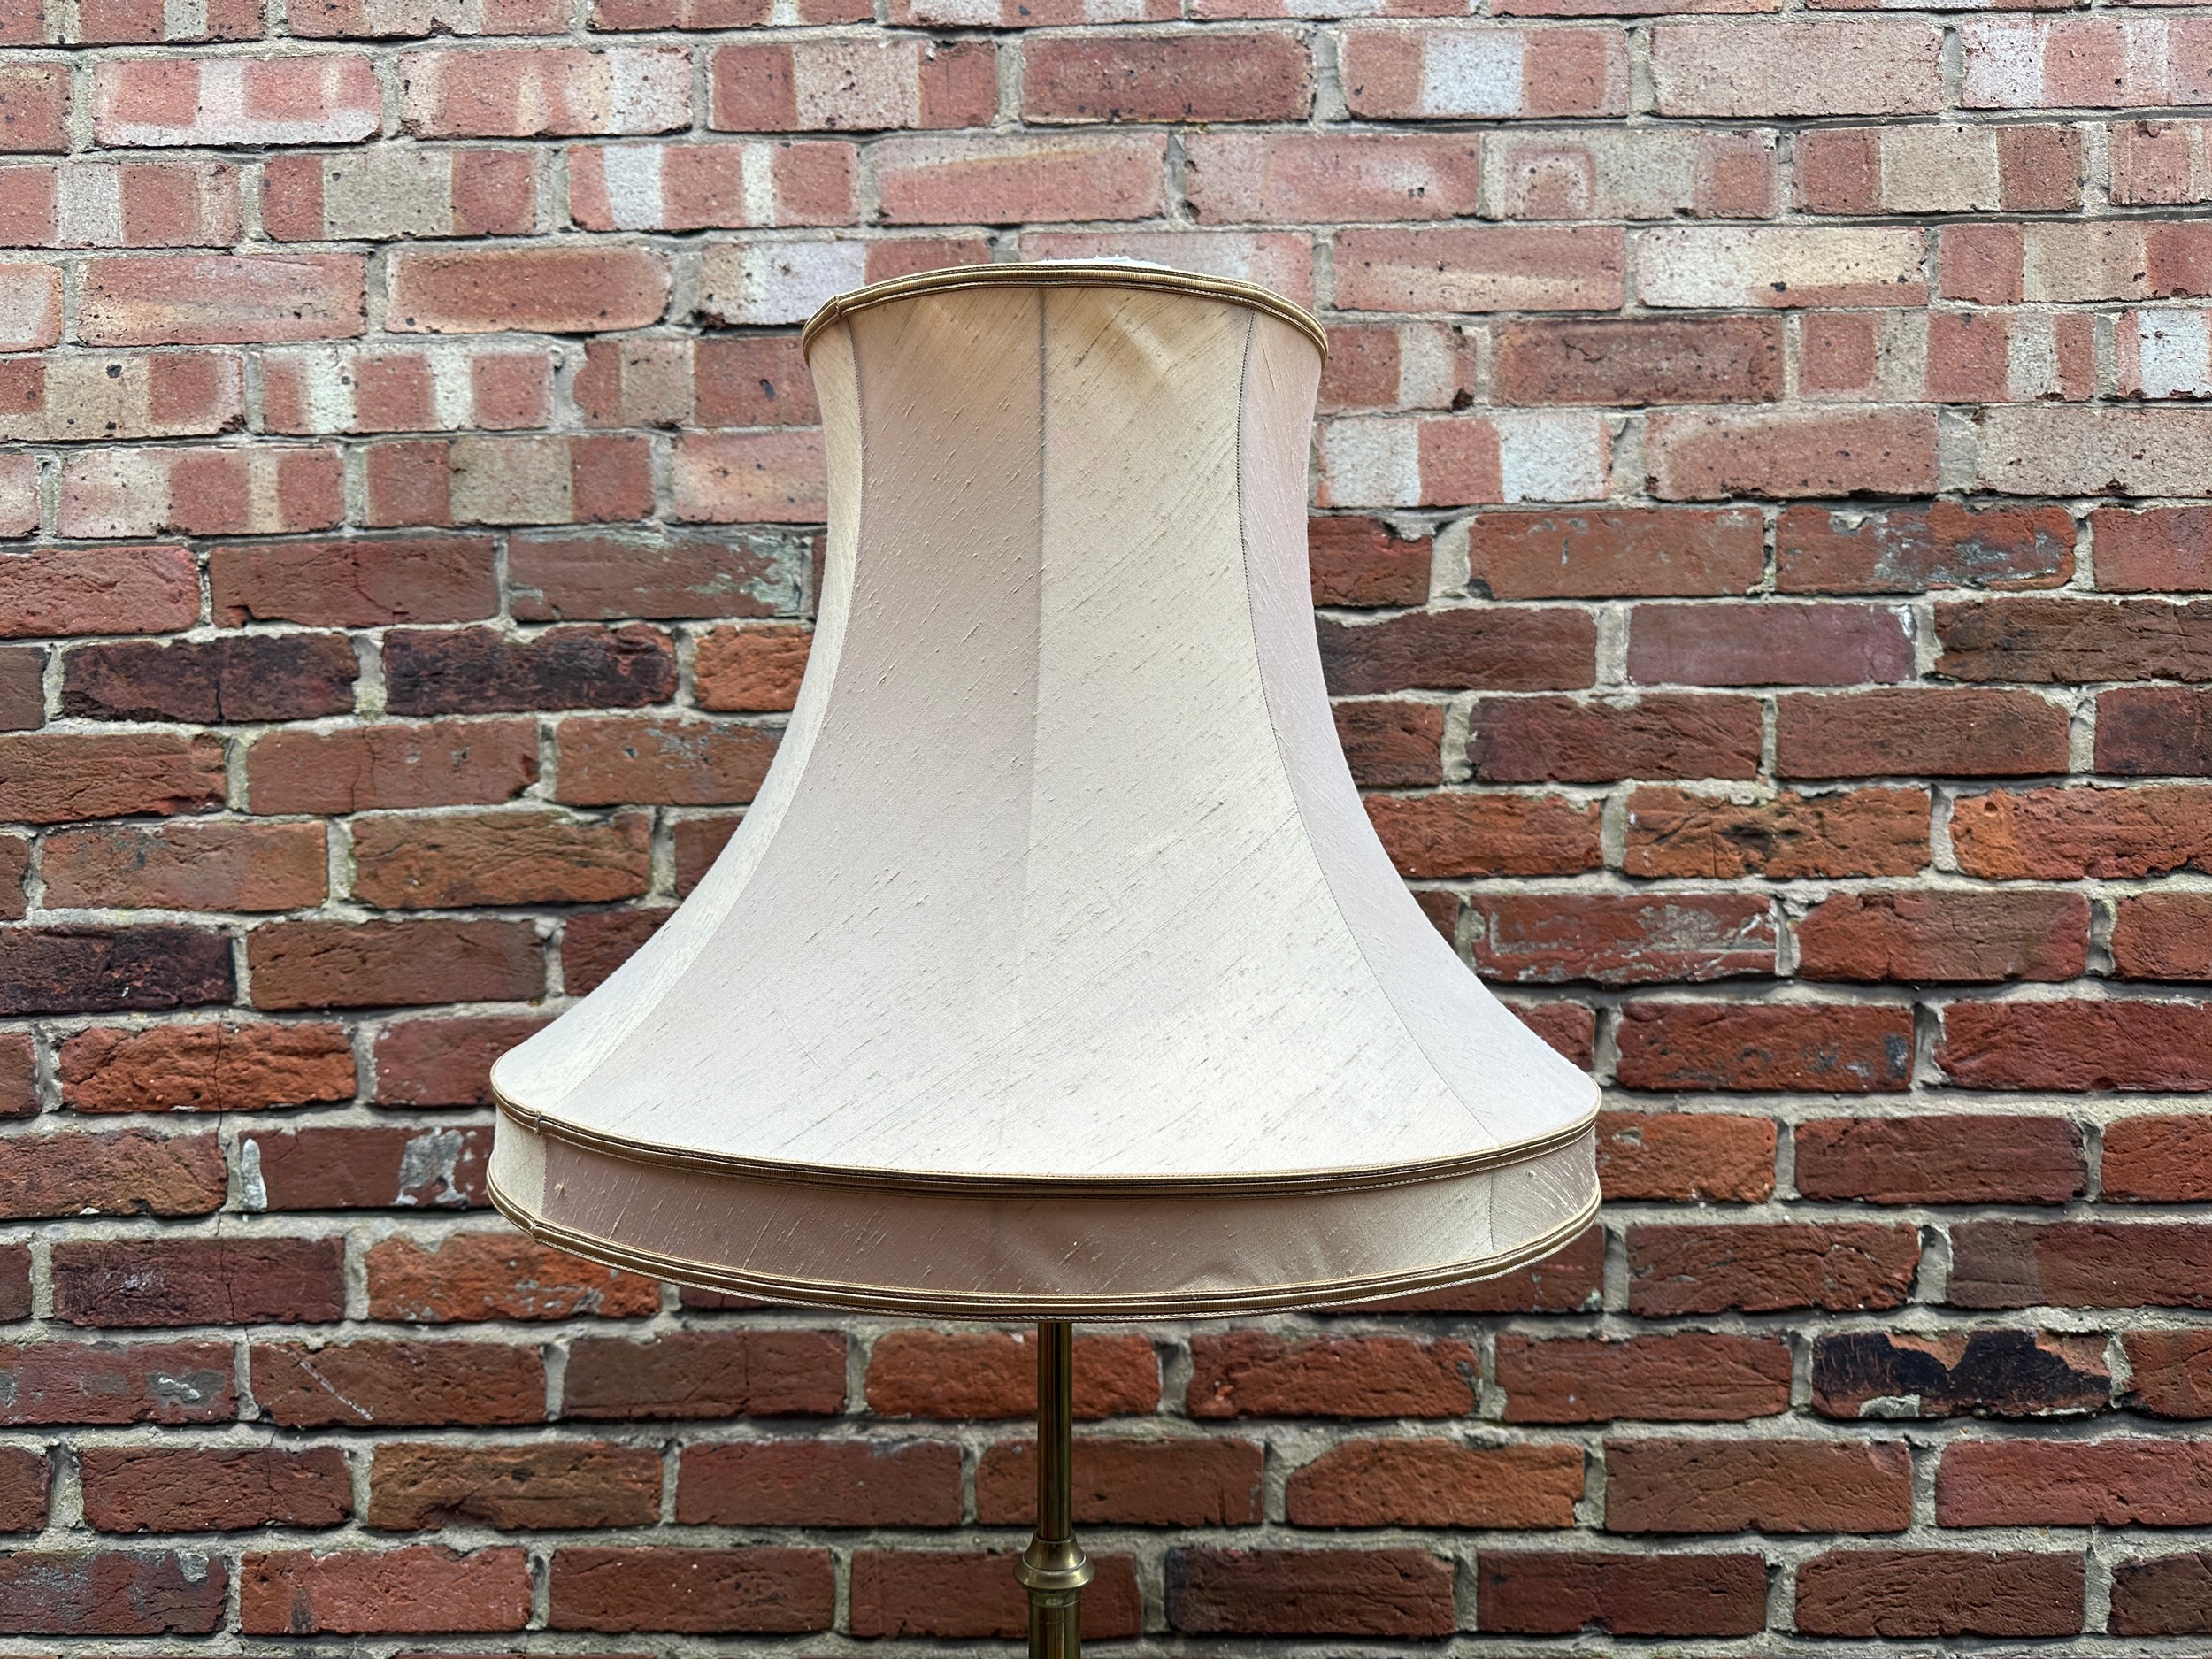 A brass standard lamp of neo-classical form with tripartite base and draped swags - Image 2 of 4